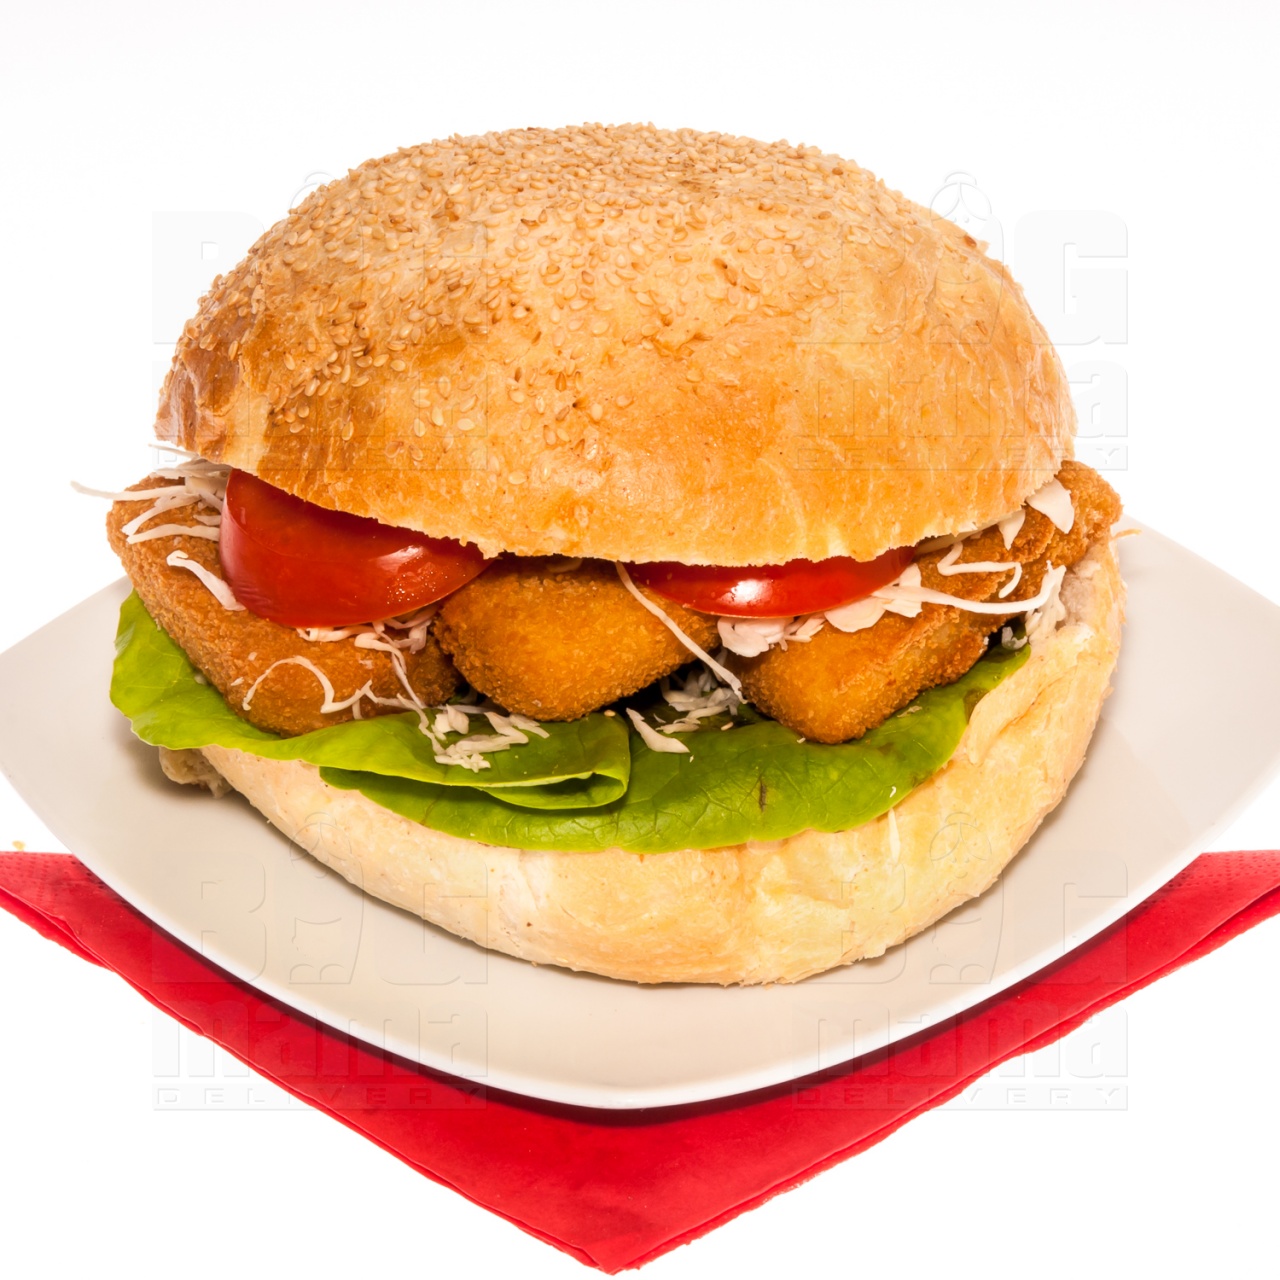 Product #146 image - Big breaded cheese sandwich